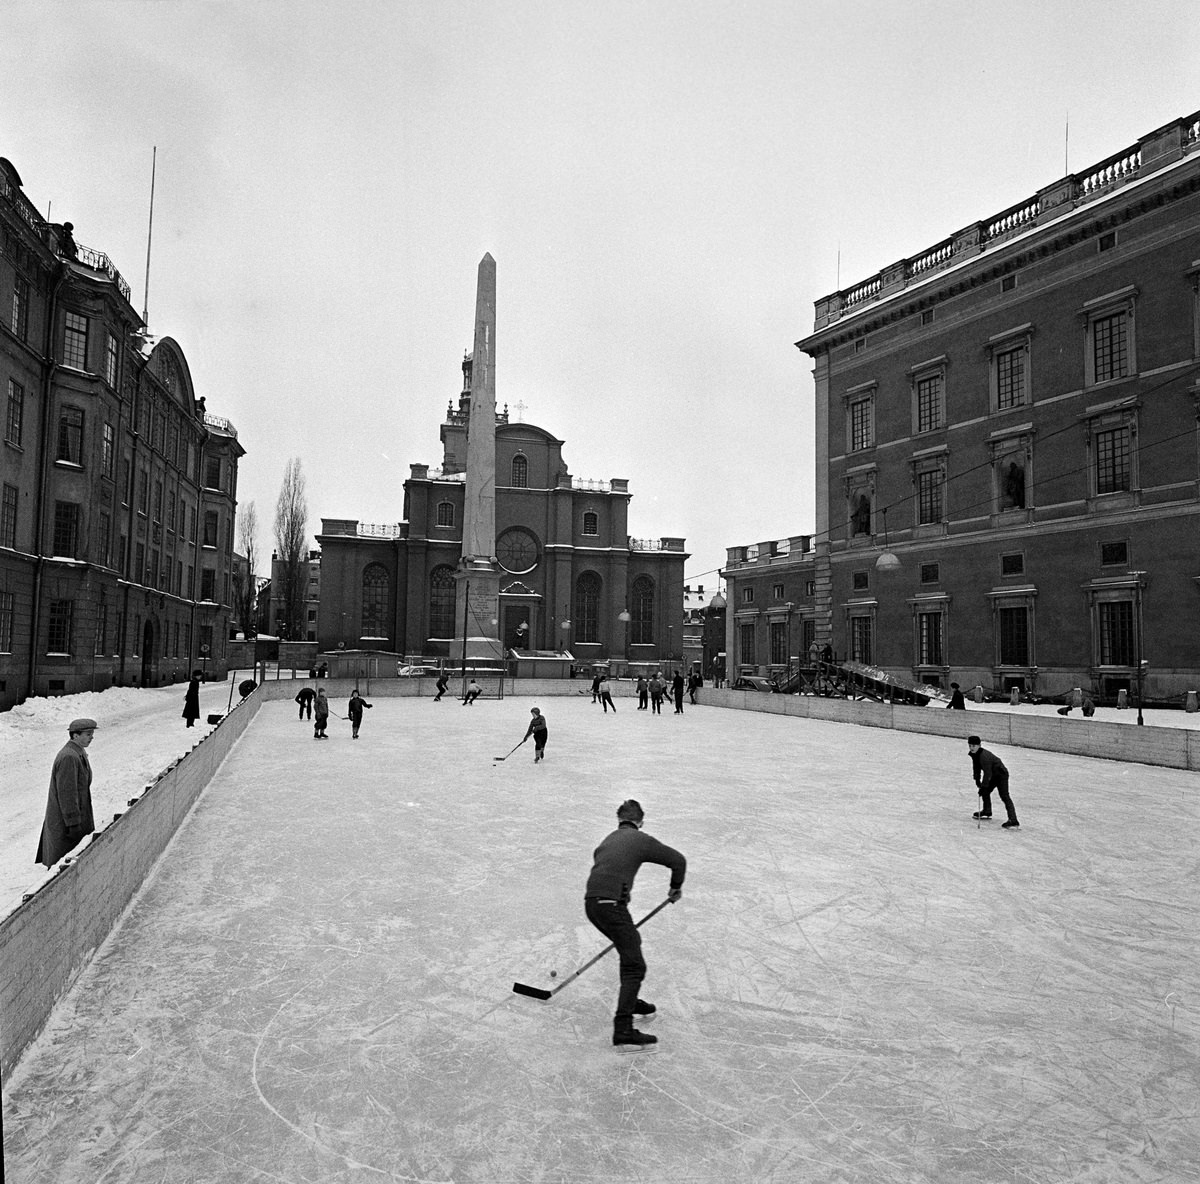 Children play hockey on a natural ice rink in Stockholm, Sweden in 1950.